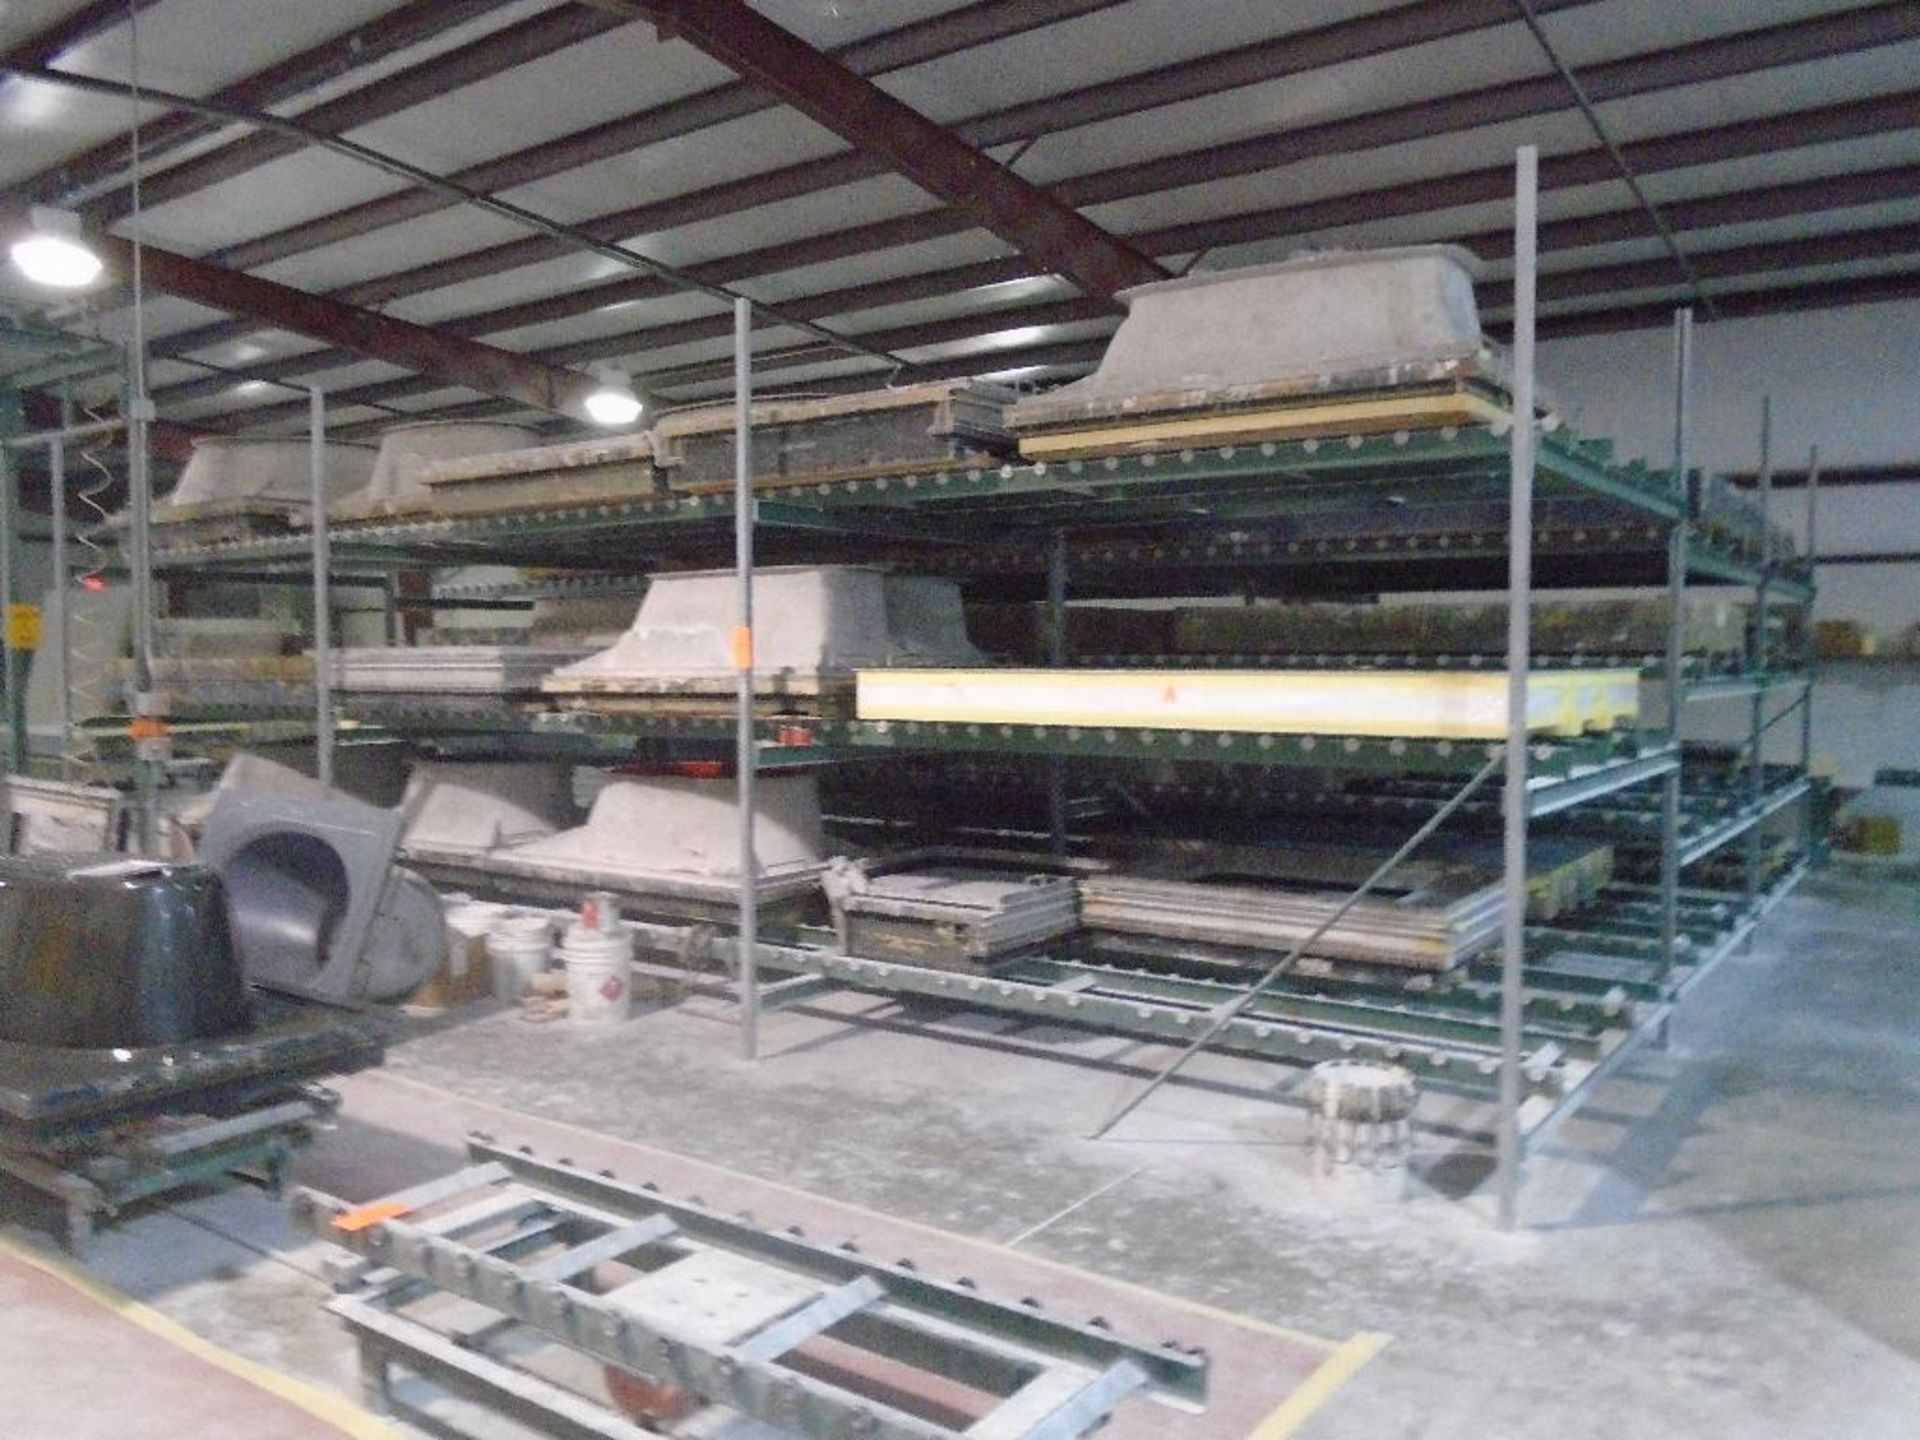 Wheel conveyor rack system approx 24' x 30' x 10' w/contents